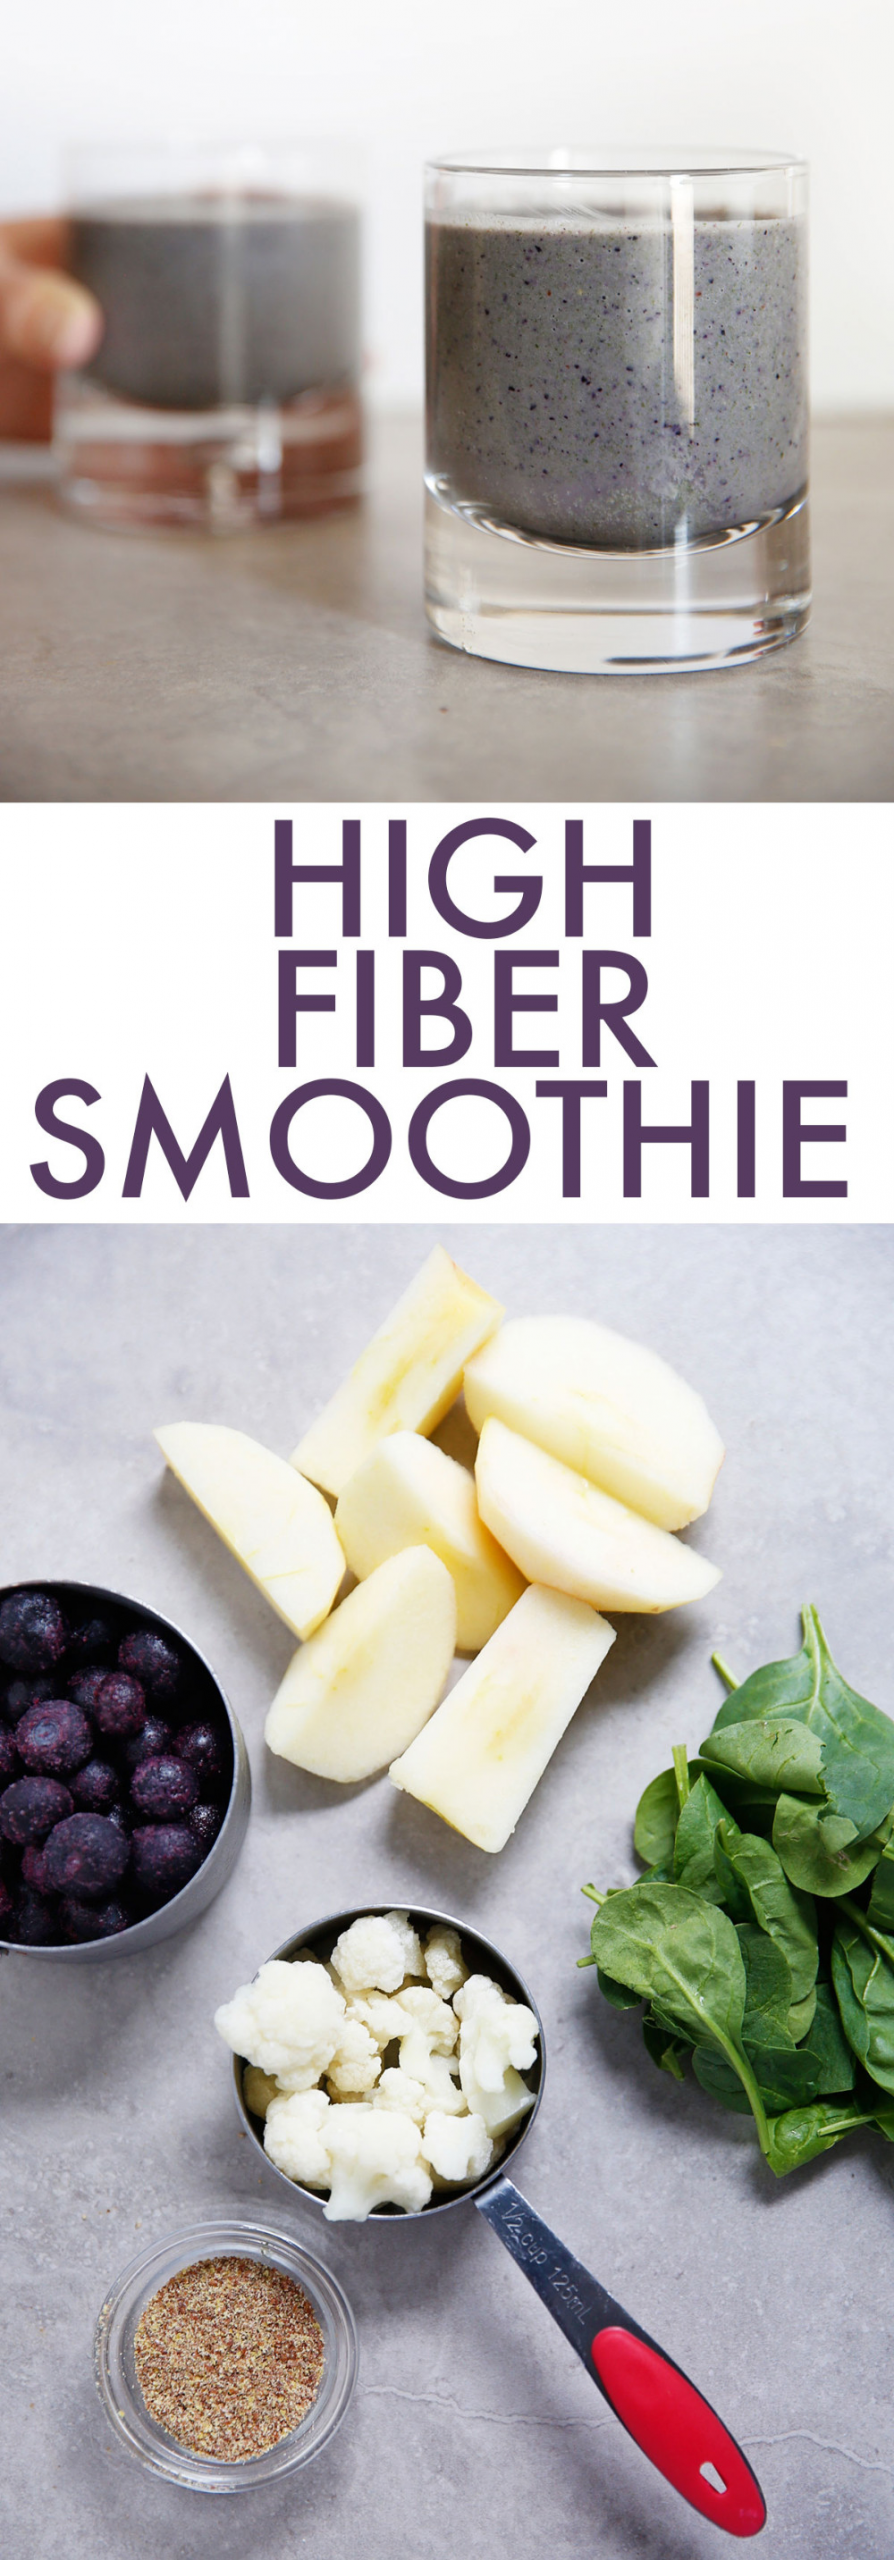 High Fiber Smoothies Recipes
 The Best High Fiber Smoothies for Constipation Best